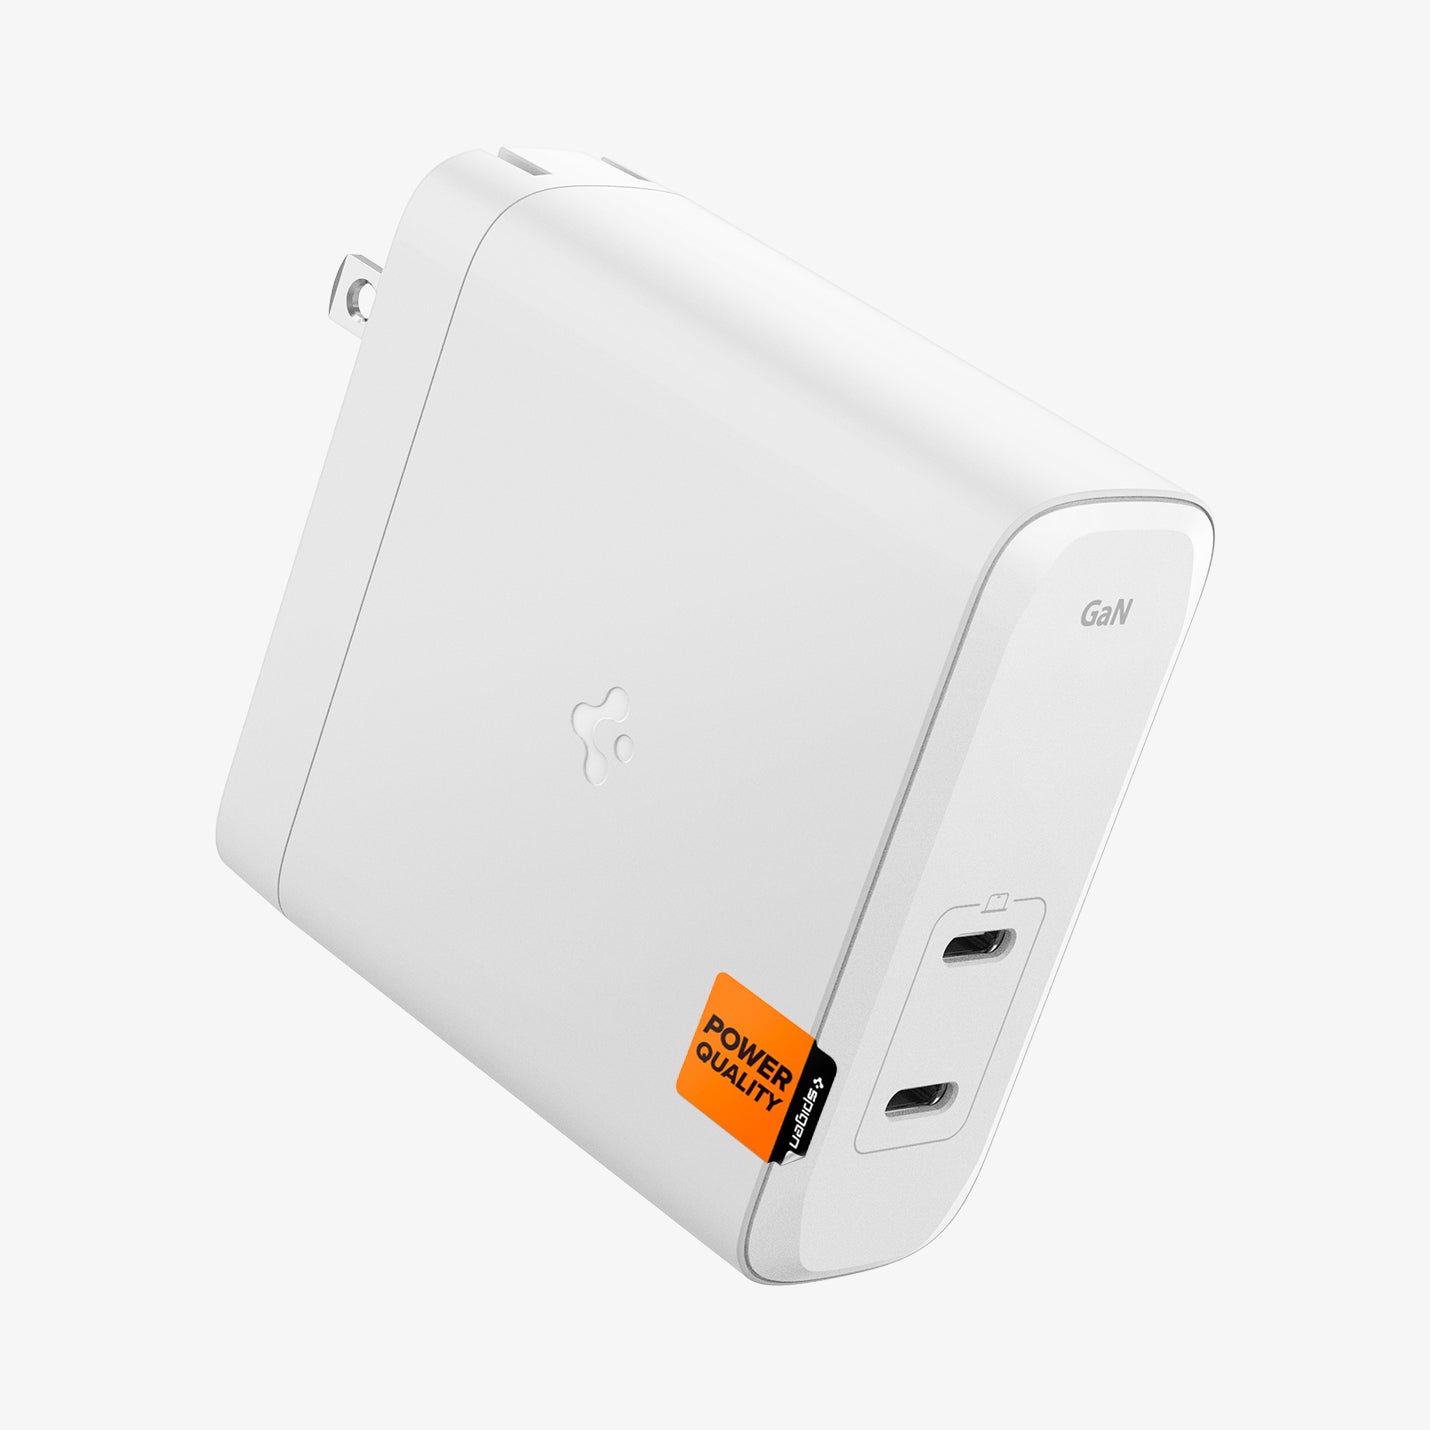 ACH04621 - ArcStation™ Pro GaN 1402 Dual Port Wall Charger PE2109 in White showing the sides and top of a wall charger with a power quality spigen sticker with 2 usb c type ports